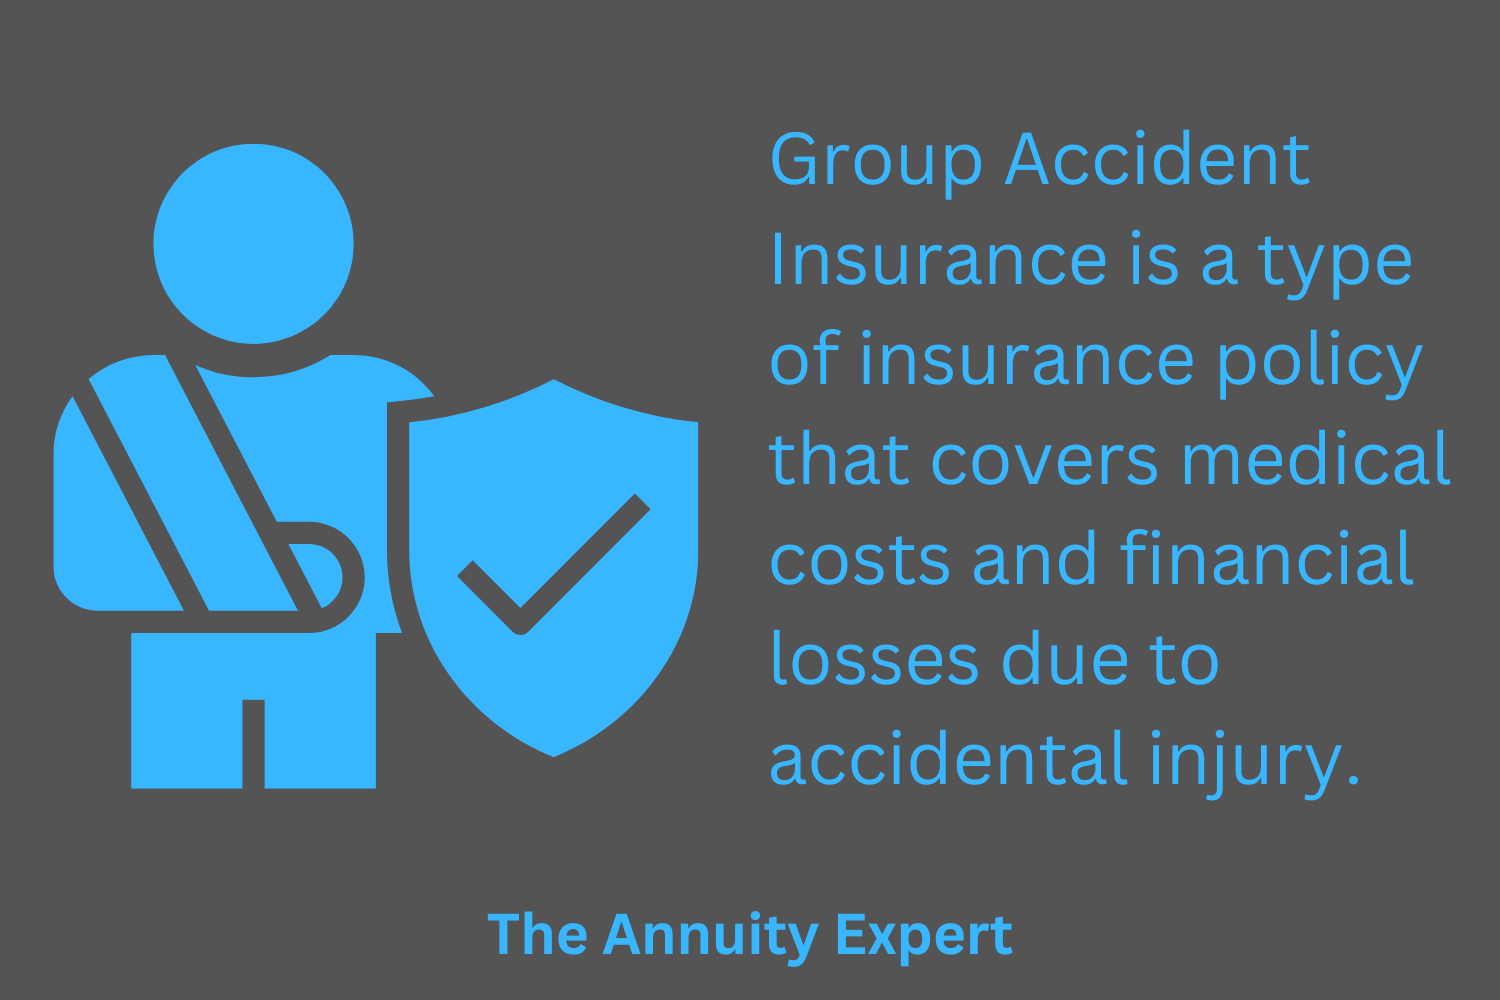 Group Accident Insurance